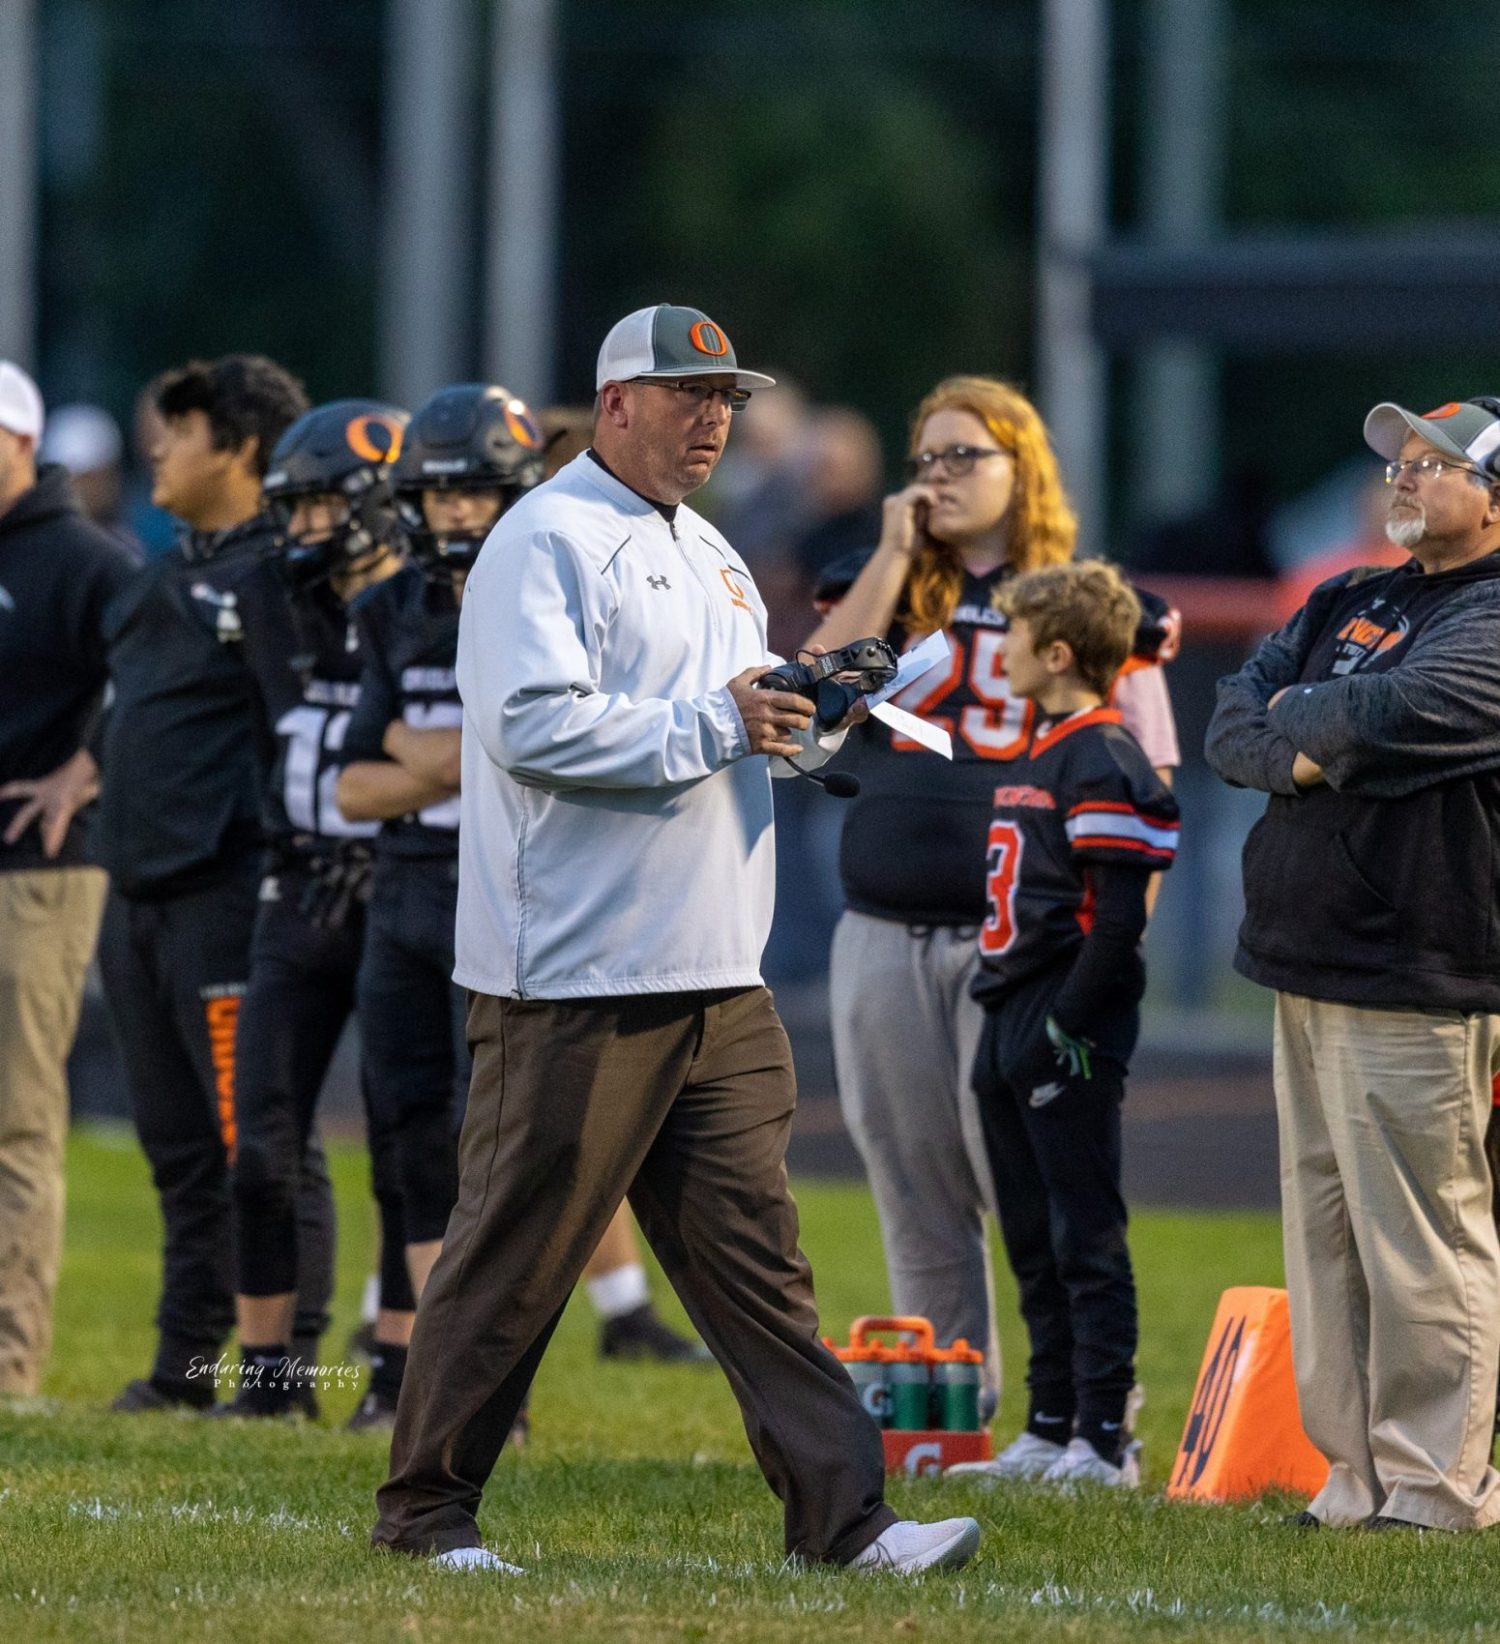 Ludington and Manistee to meet for the 145th time in Friday night football action